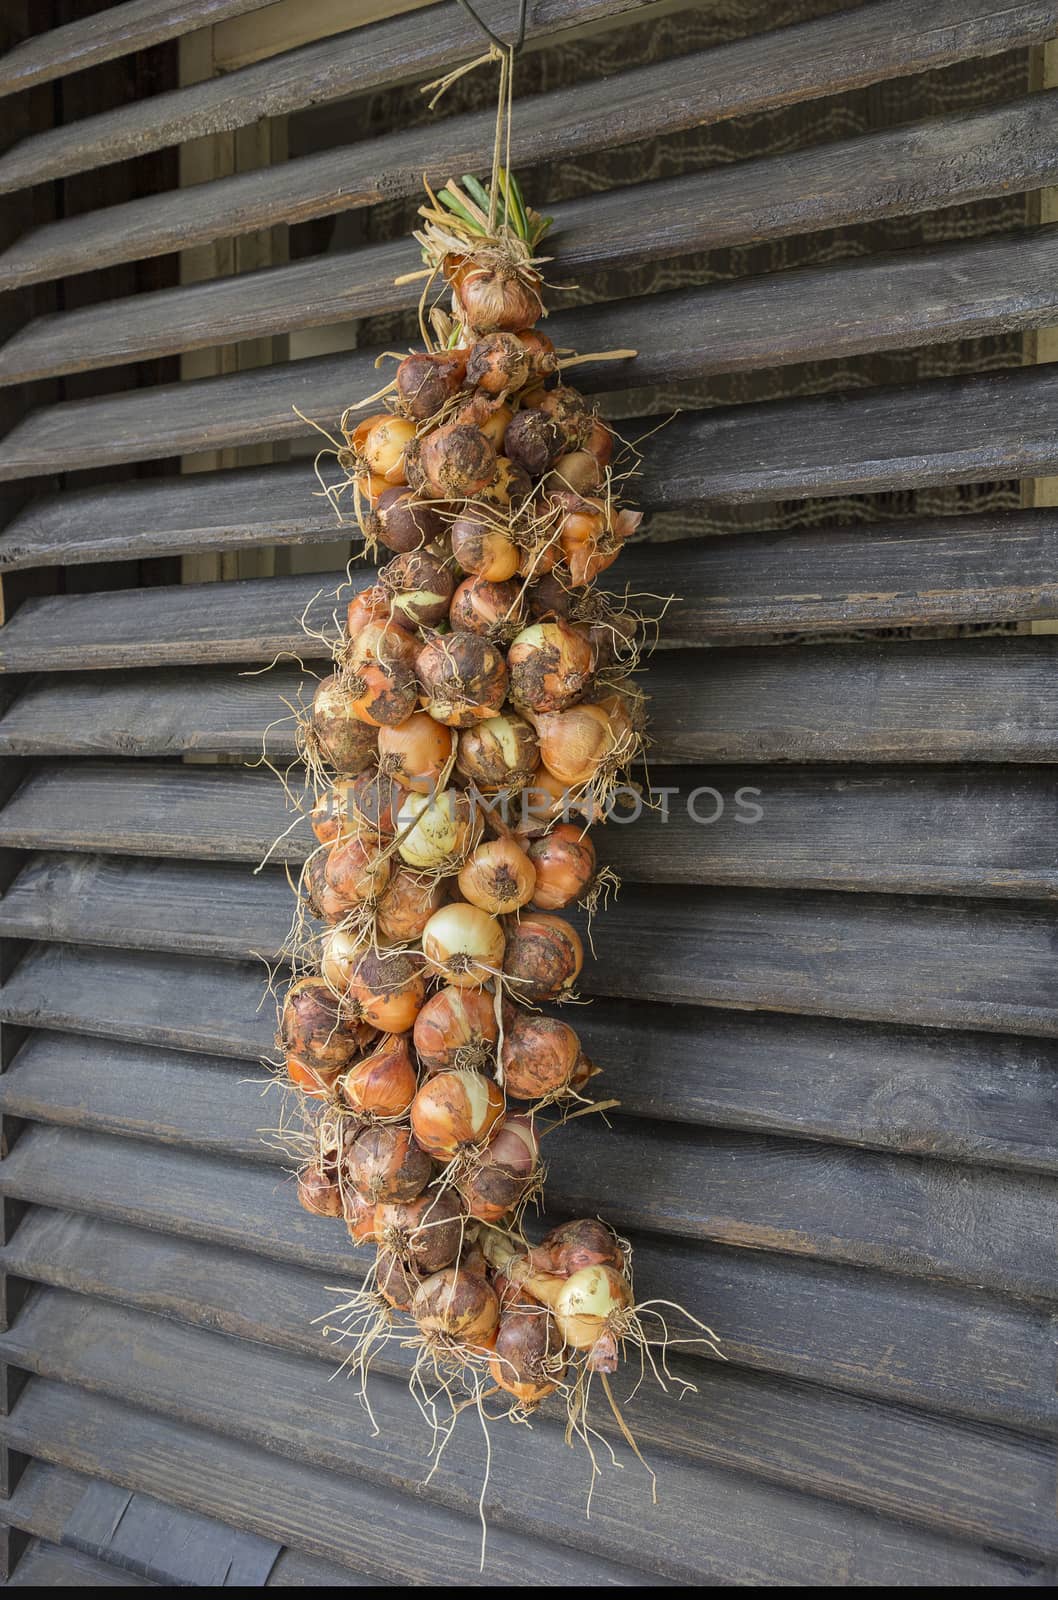 Bunches of yellow onions hanging and drying outside a rustic window. by EdVal